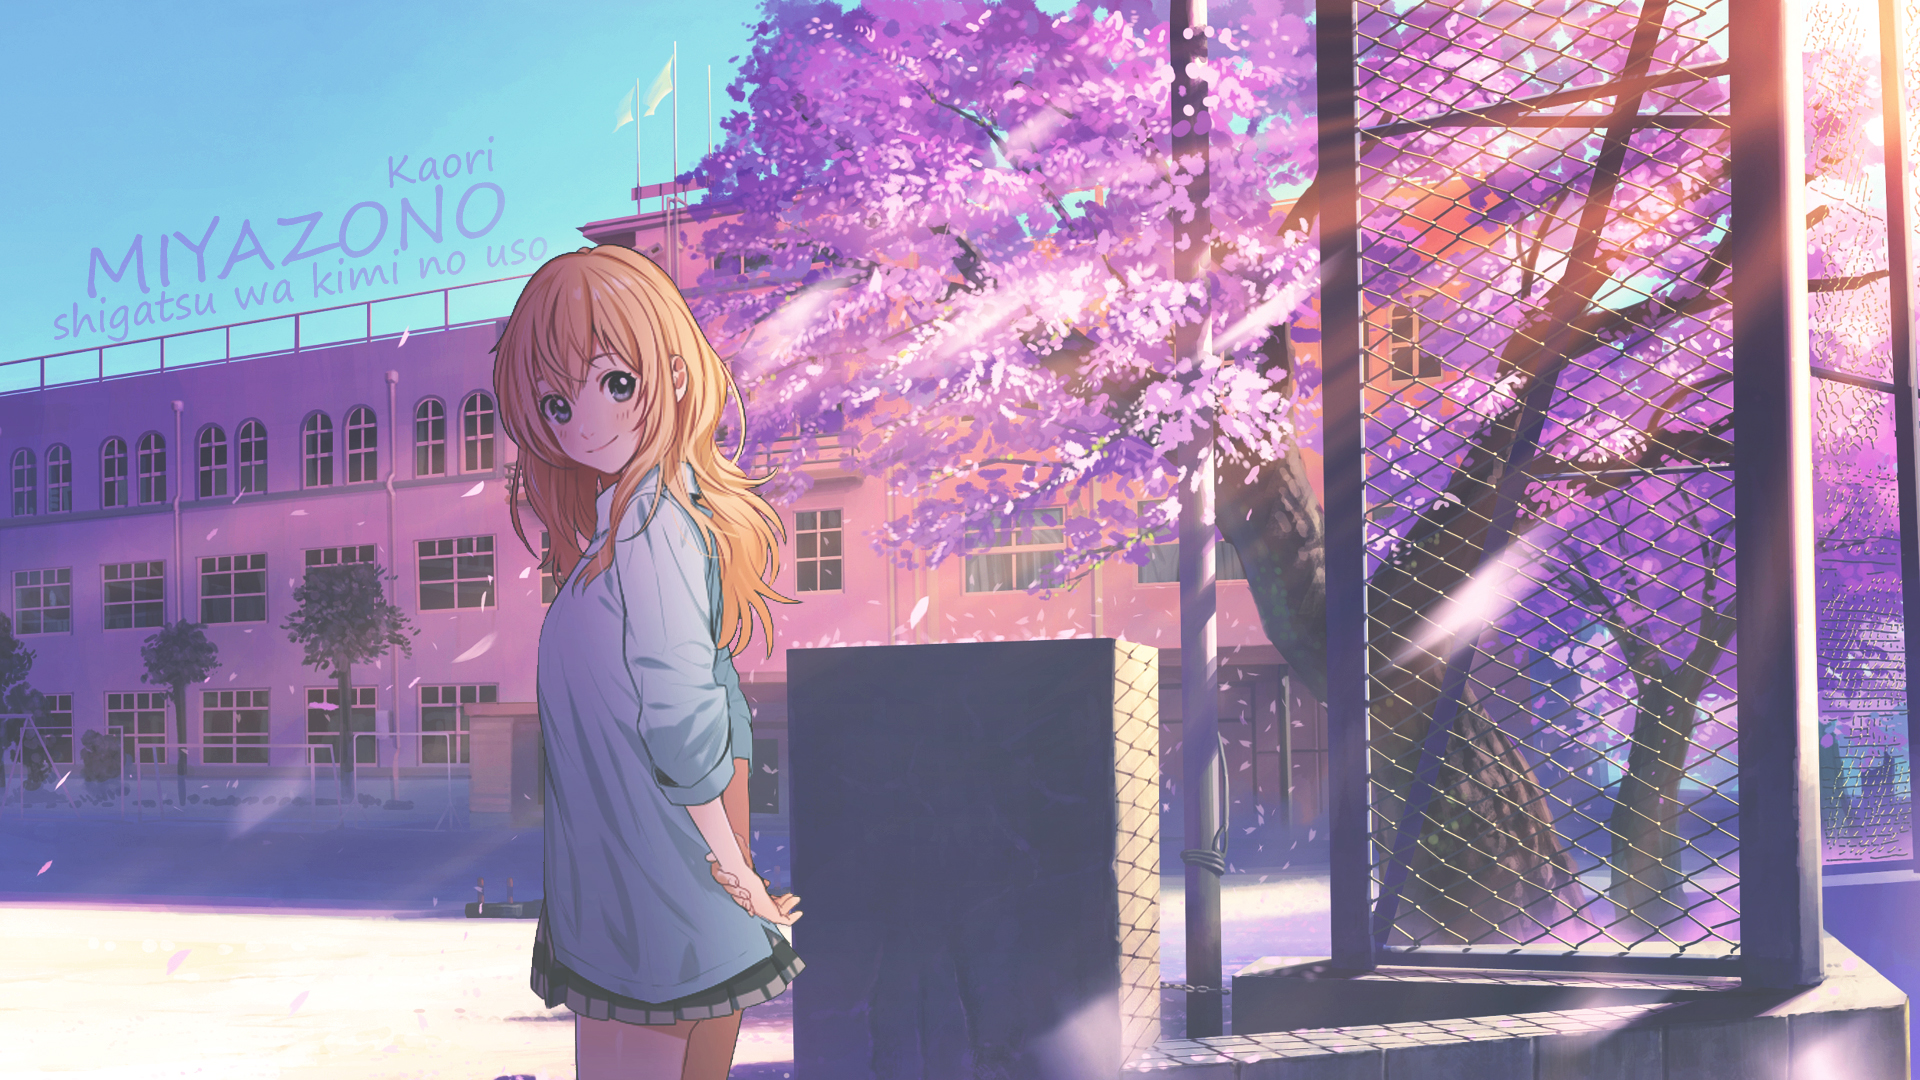 Your Lie In April Download Wallpaper - Anime Background 16 9 - 1920x1080  Wallpaper 